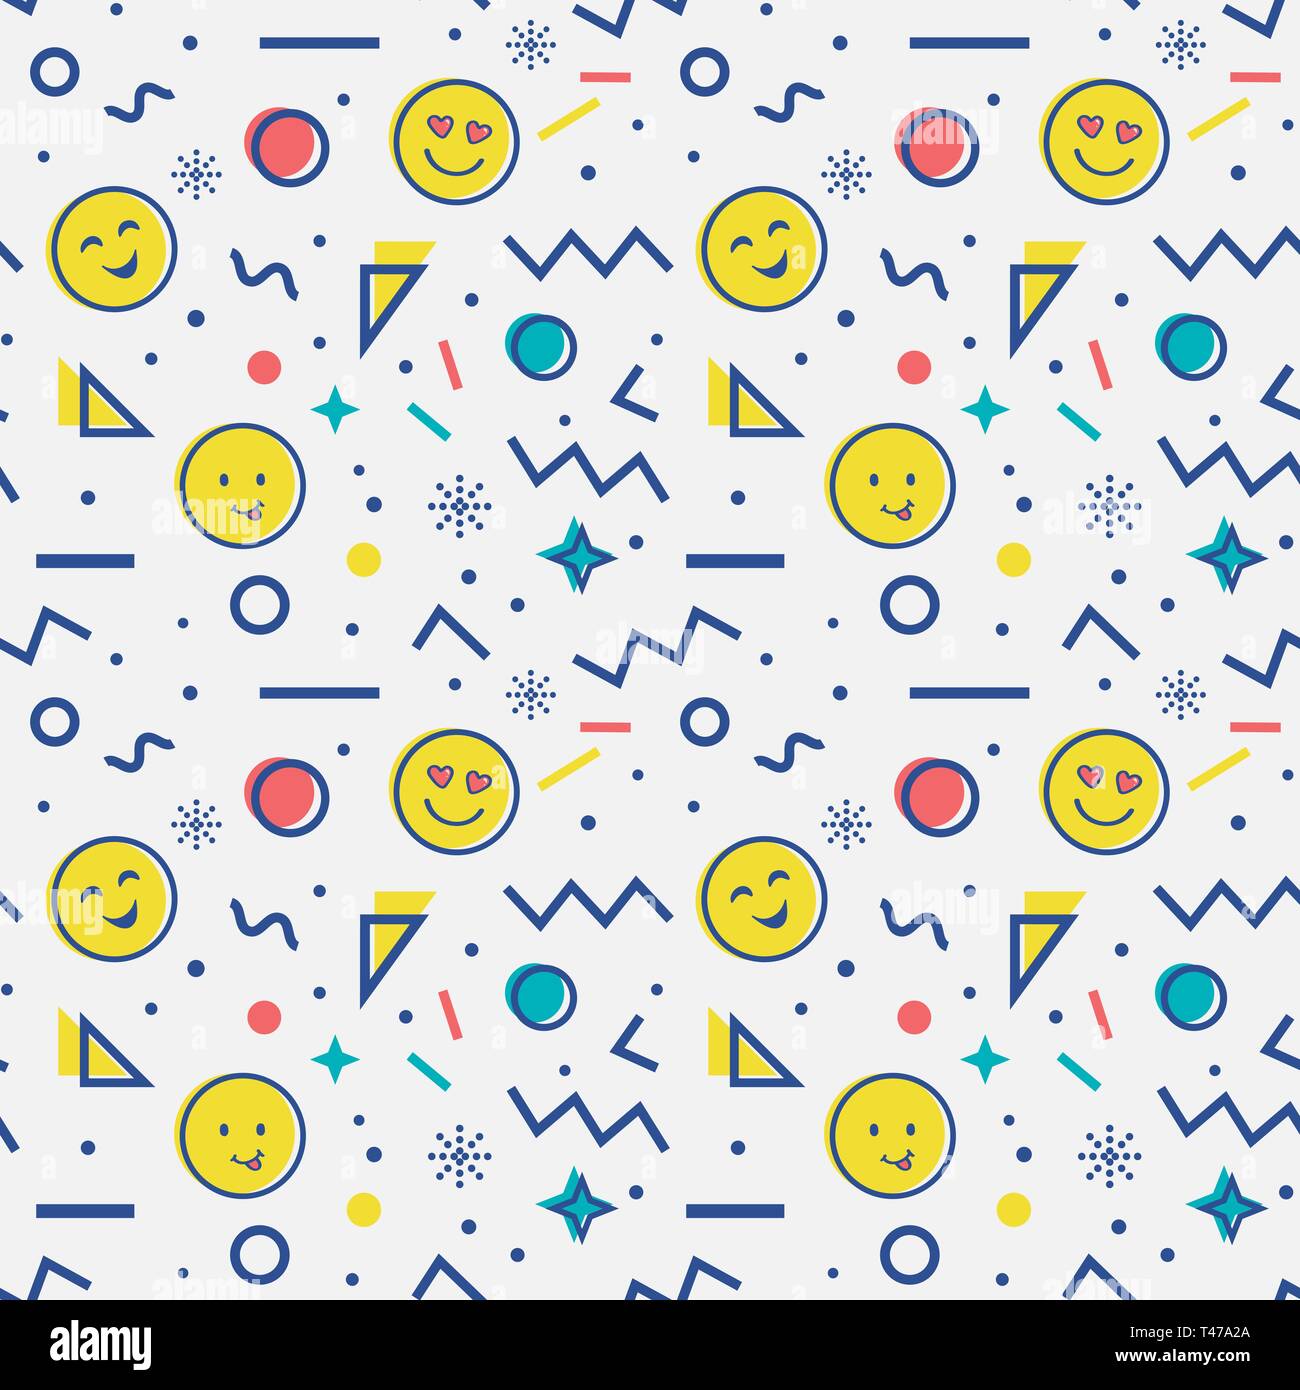 Cute seamless pattern with emoji and abstract geometric shapes in memphis style. Trendy vector background in white, blue, yellow and red colors. Stock Vector